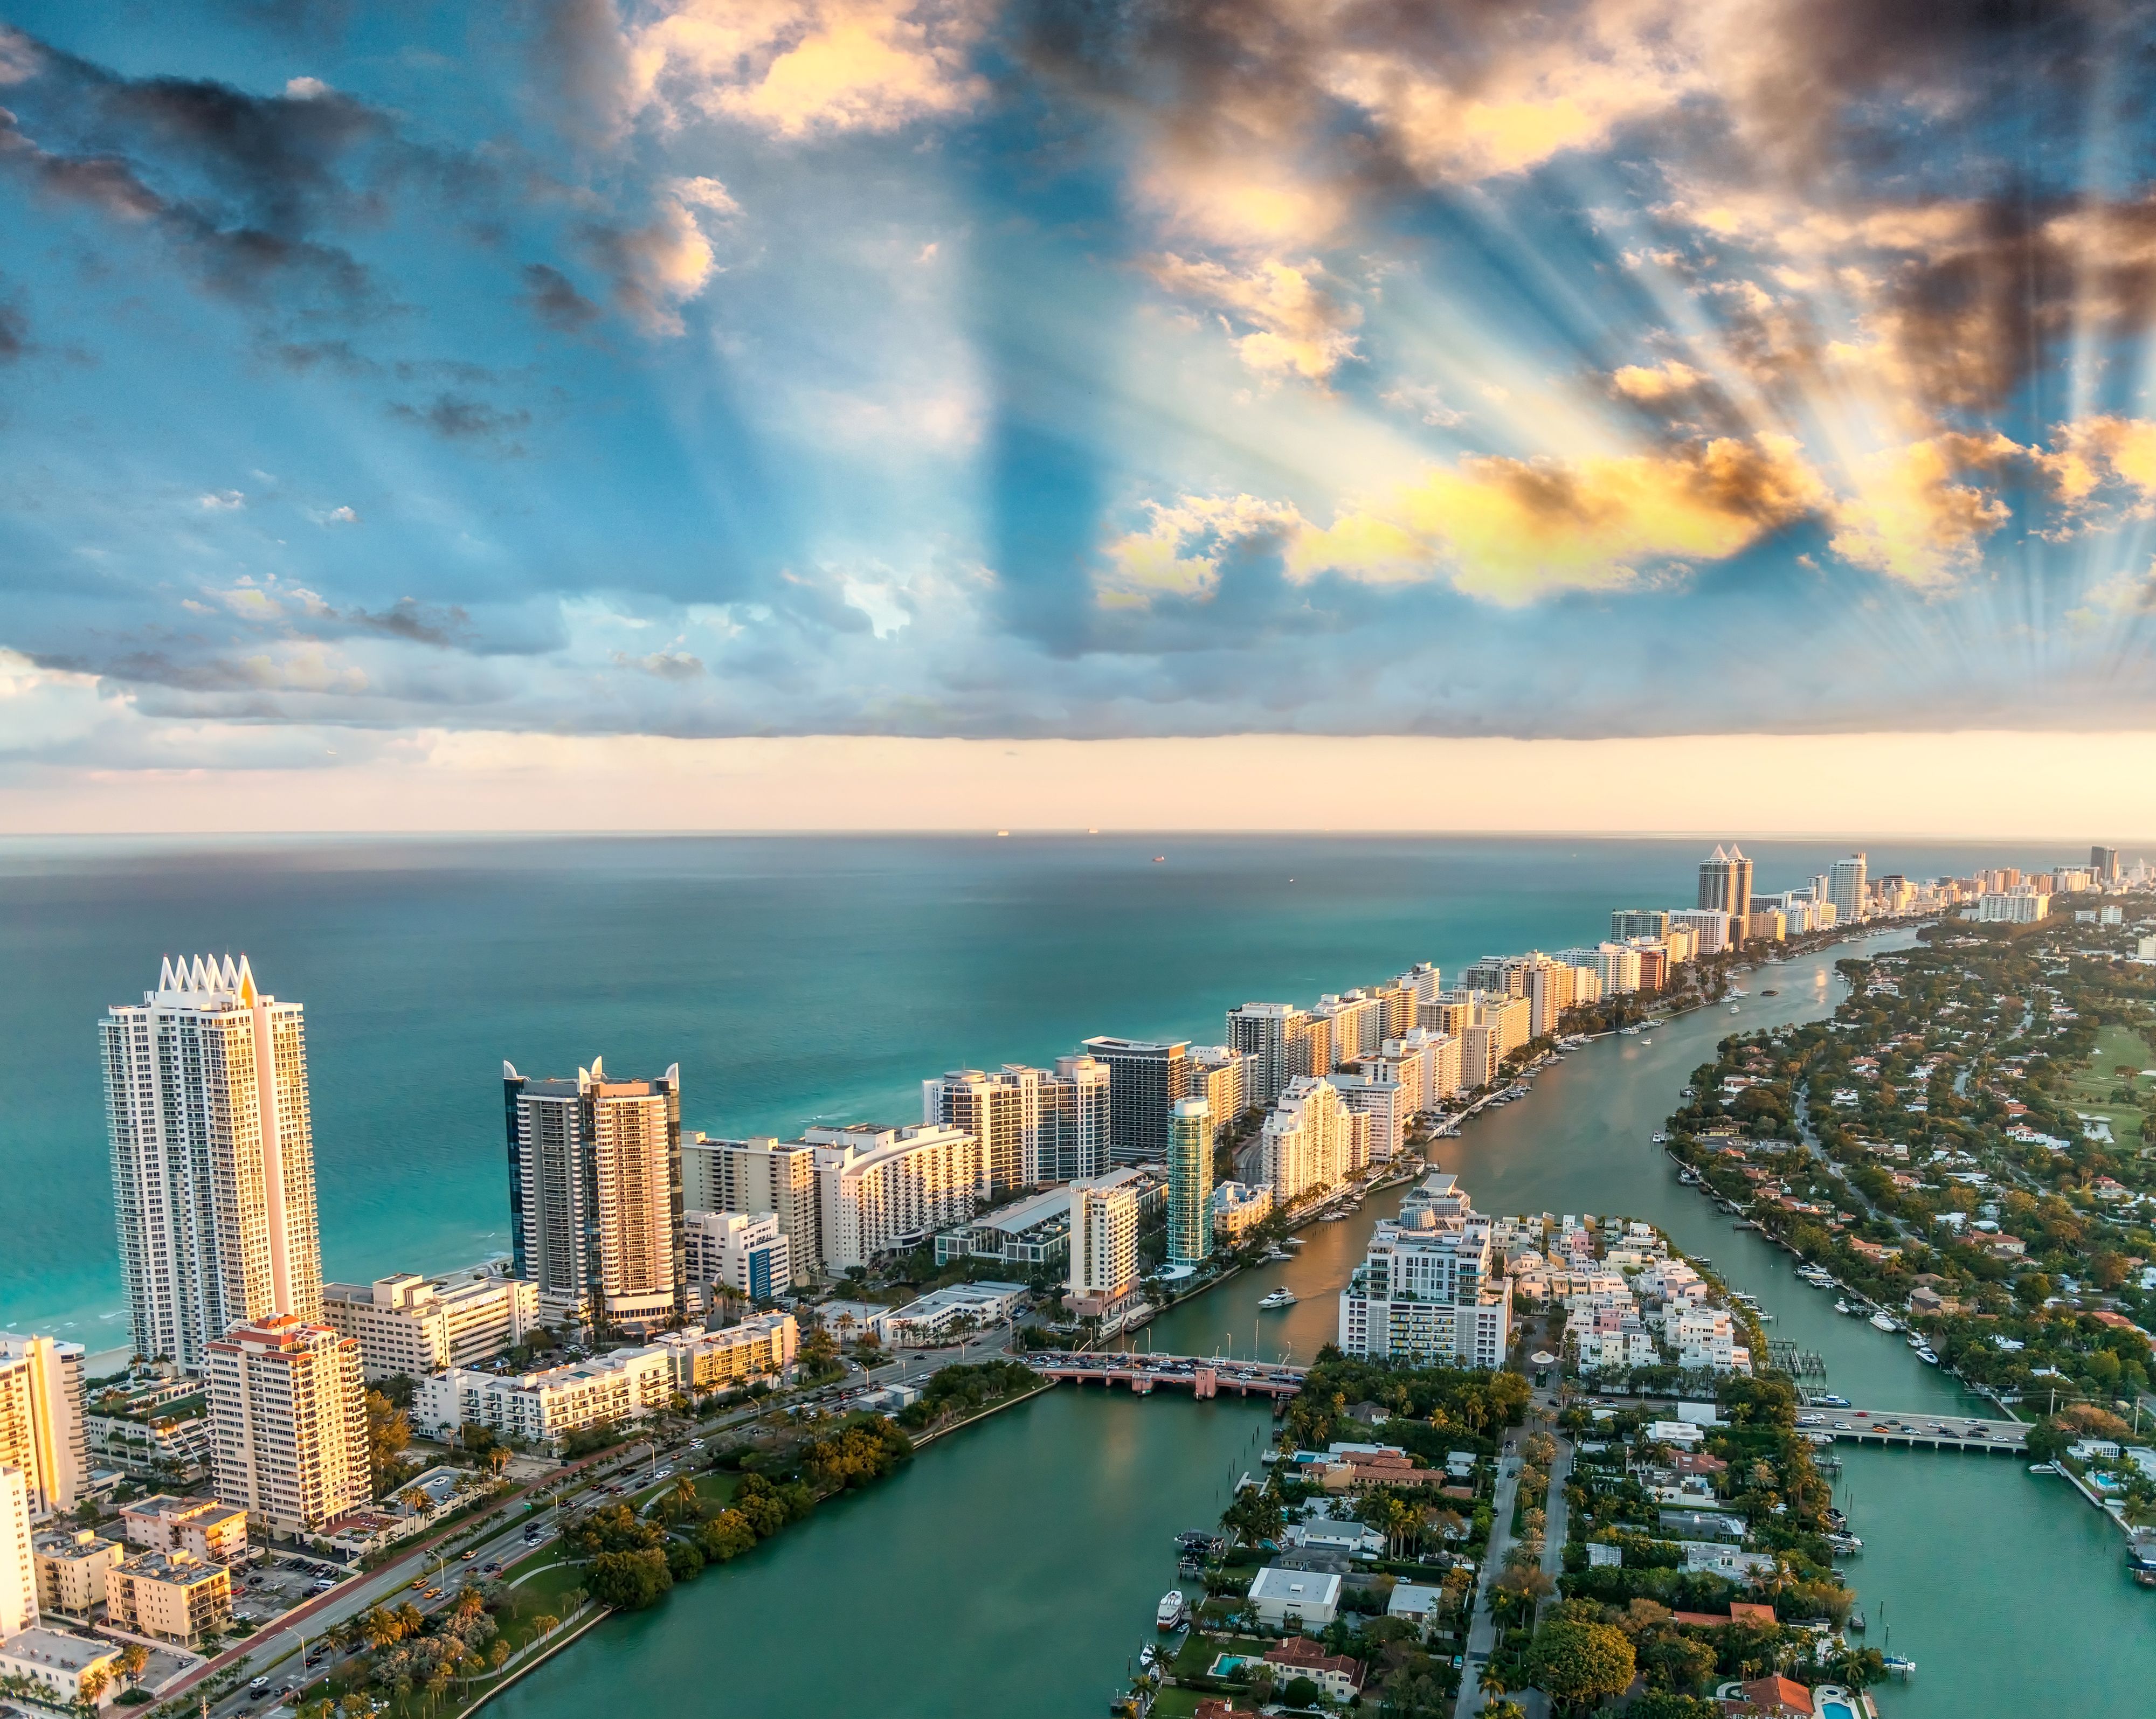 An aerial view of the city of Miami, Florida. - Miami